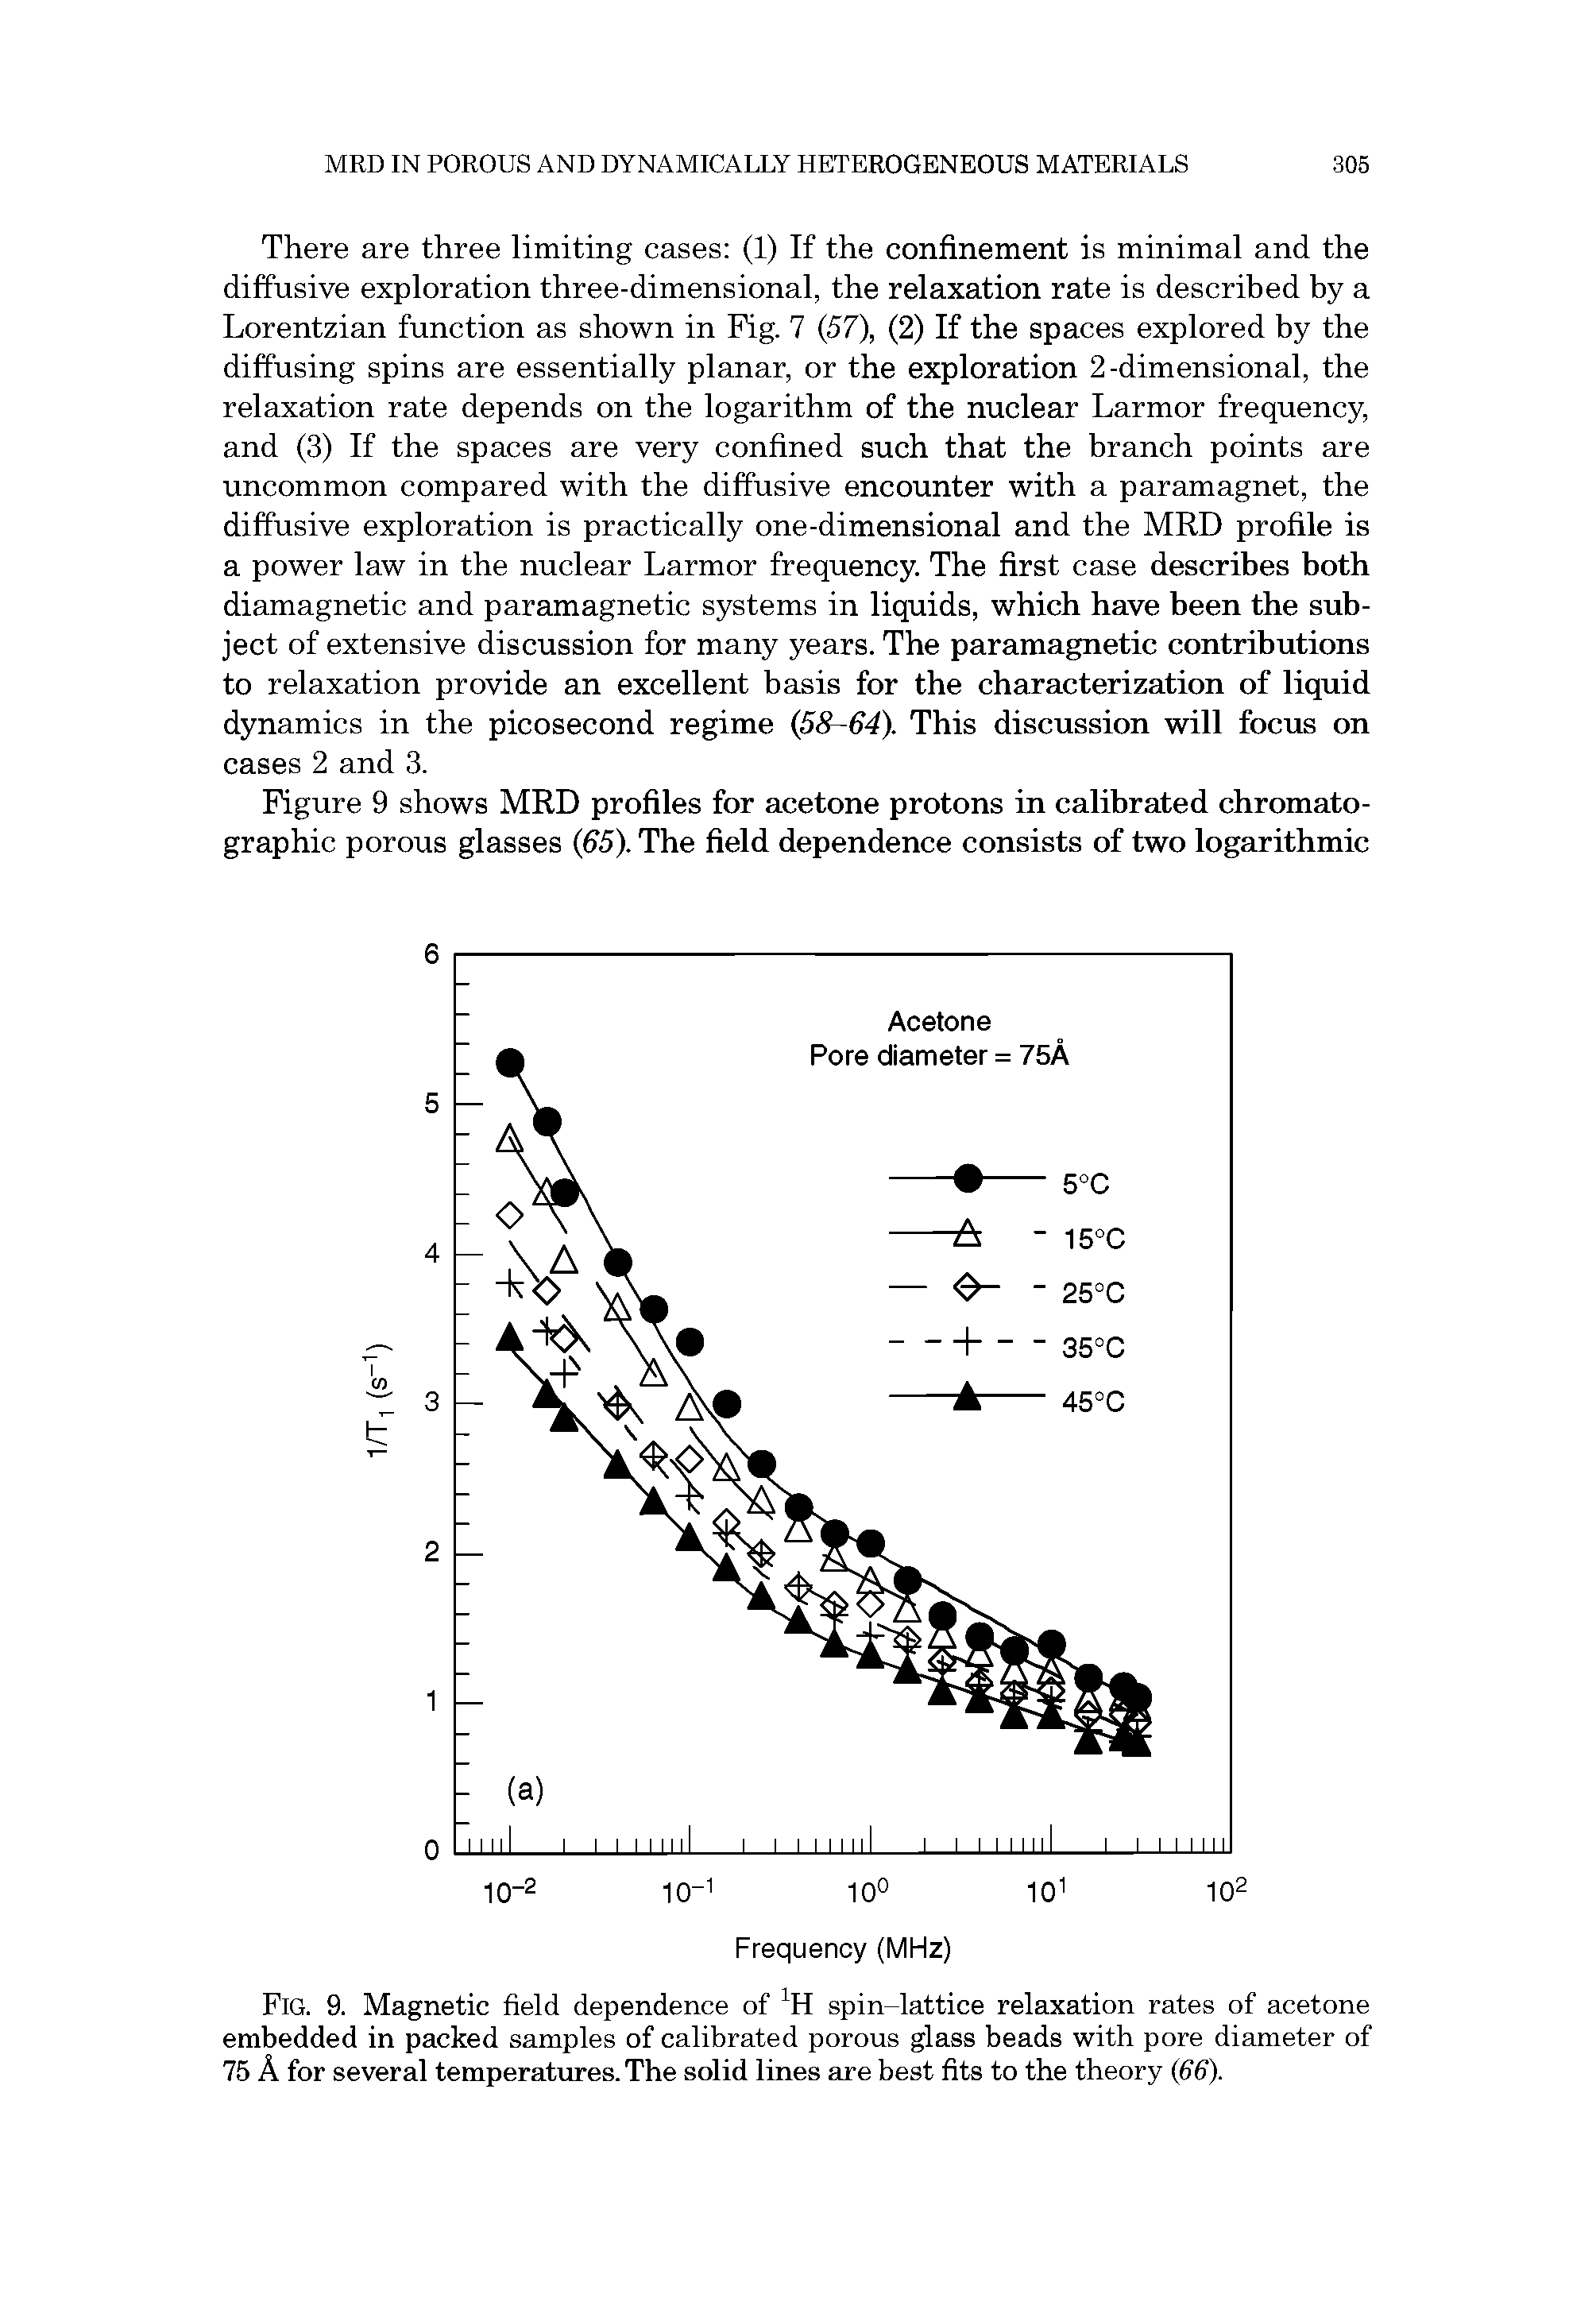 Fig. 9. Magnetic field dependence of spin-lattice relaxation rates of acetone embedded in packed samples of calibrated porous glass beads with pore diameter of 75 A for several temperatures. The solid lines are best fits to the theory (66).